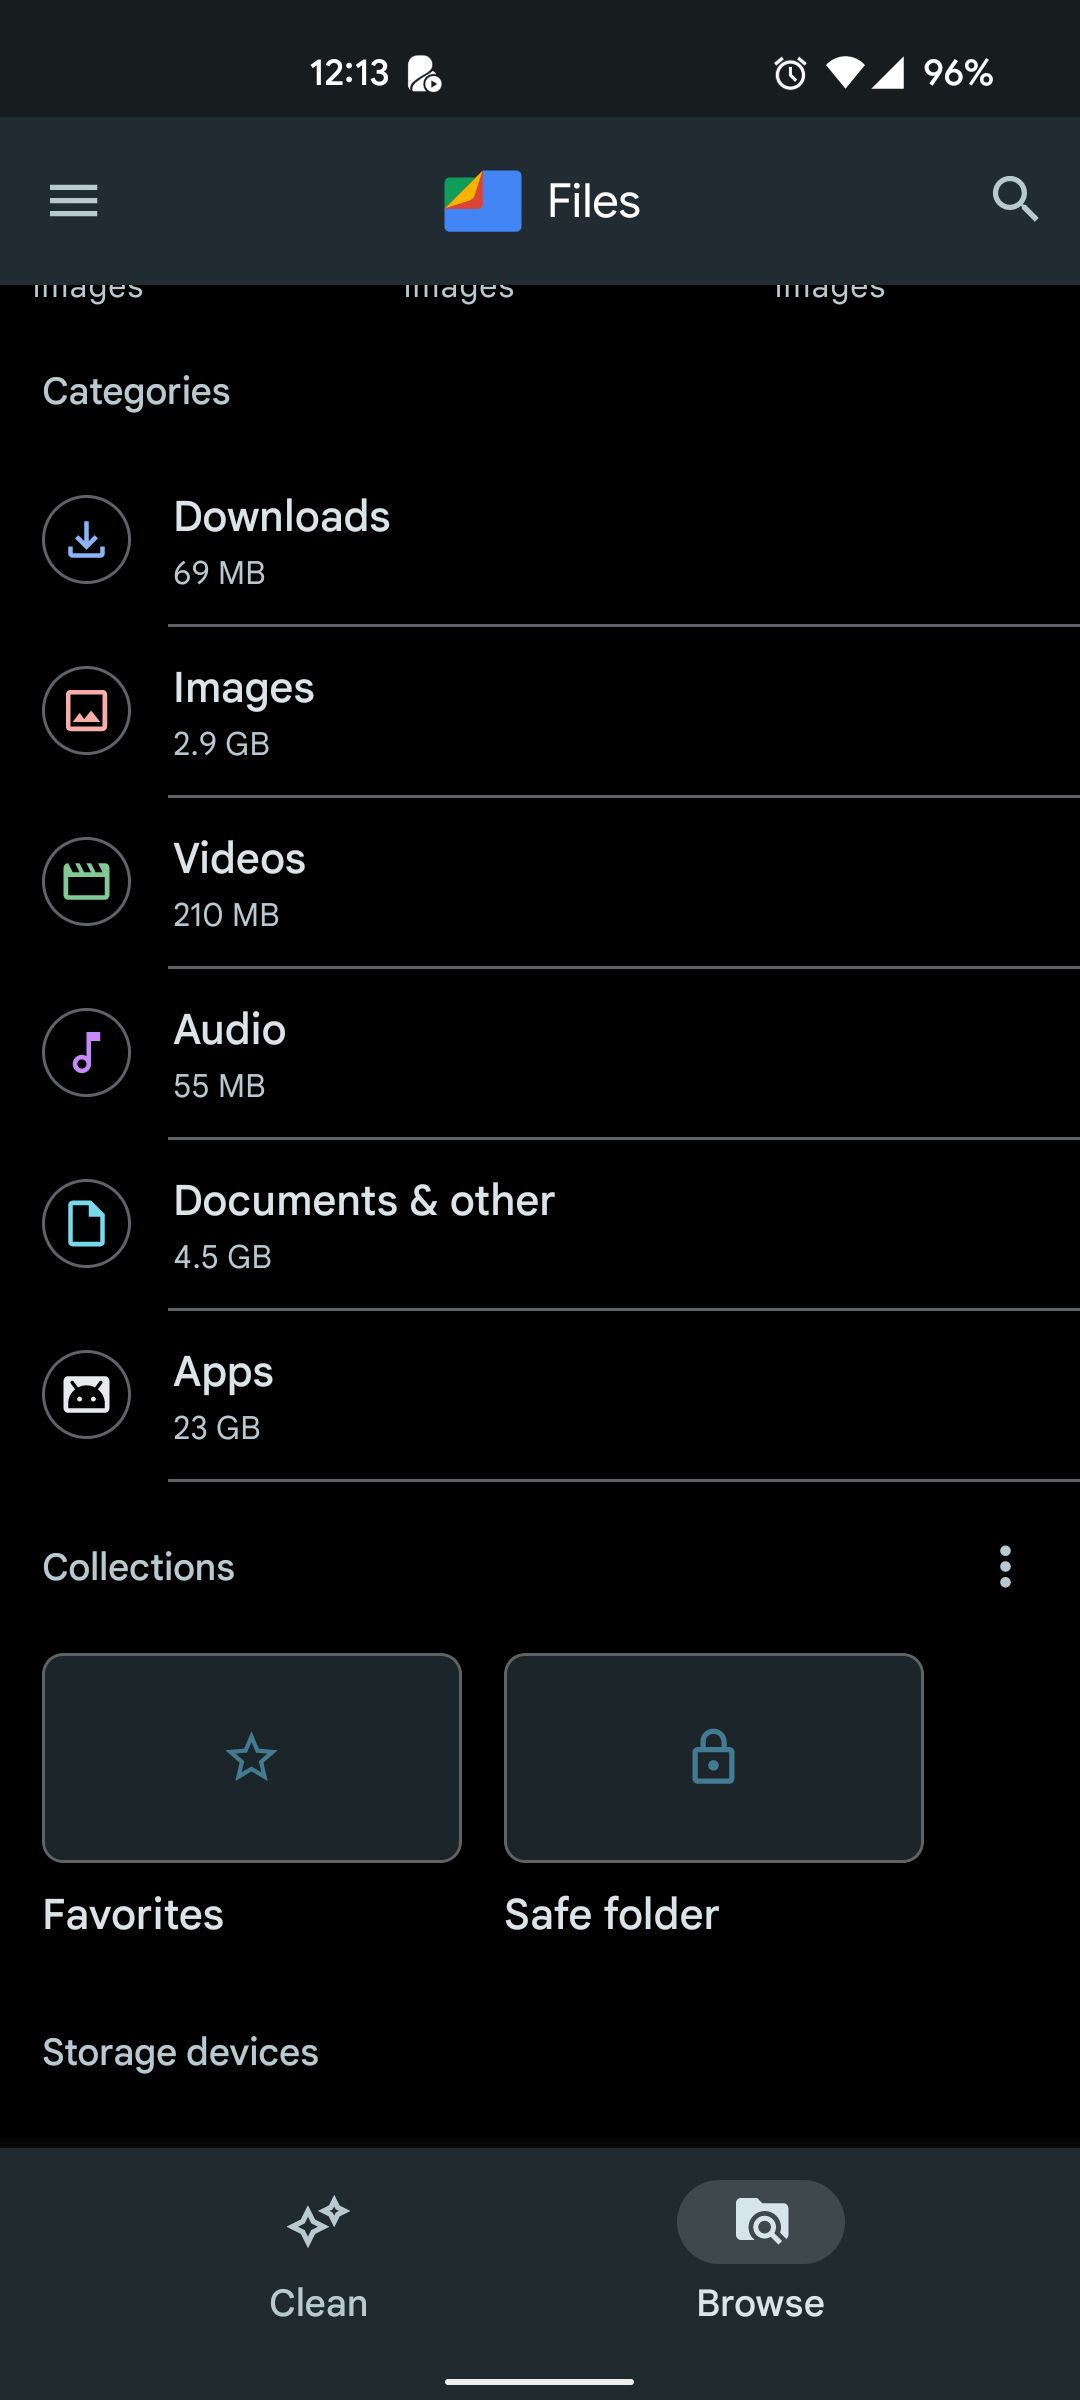 Categories section in Files app